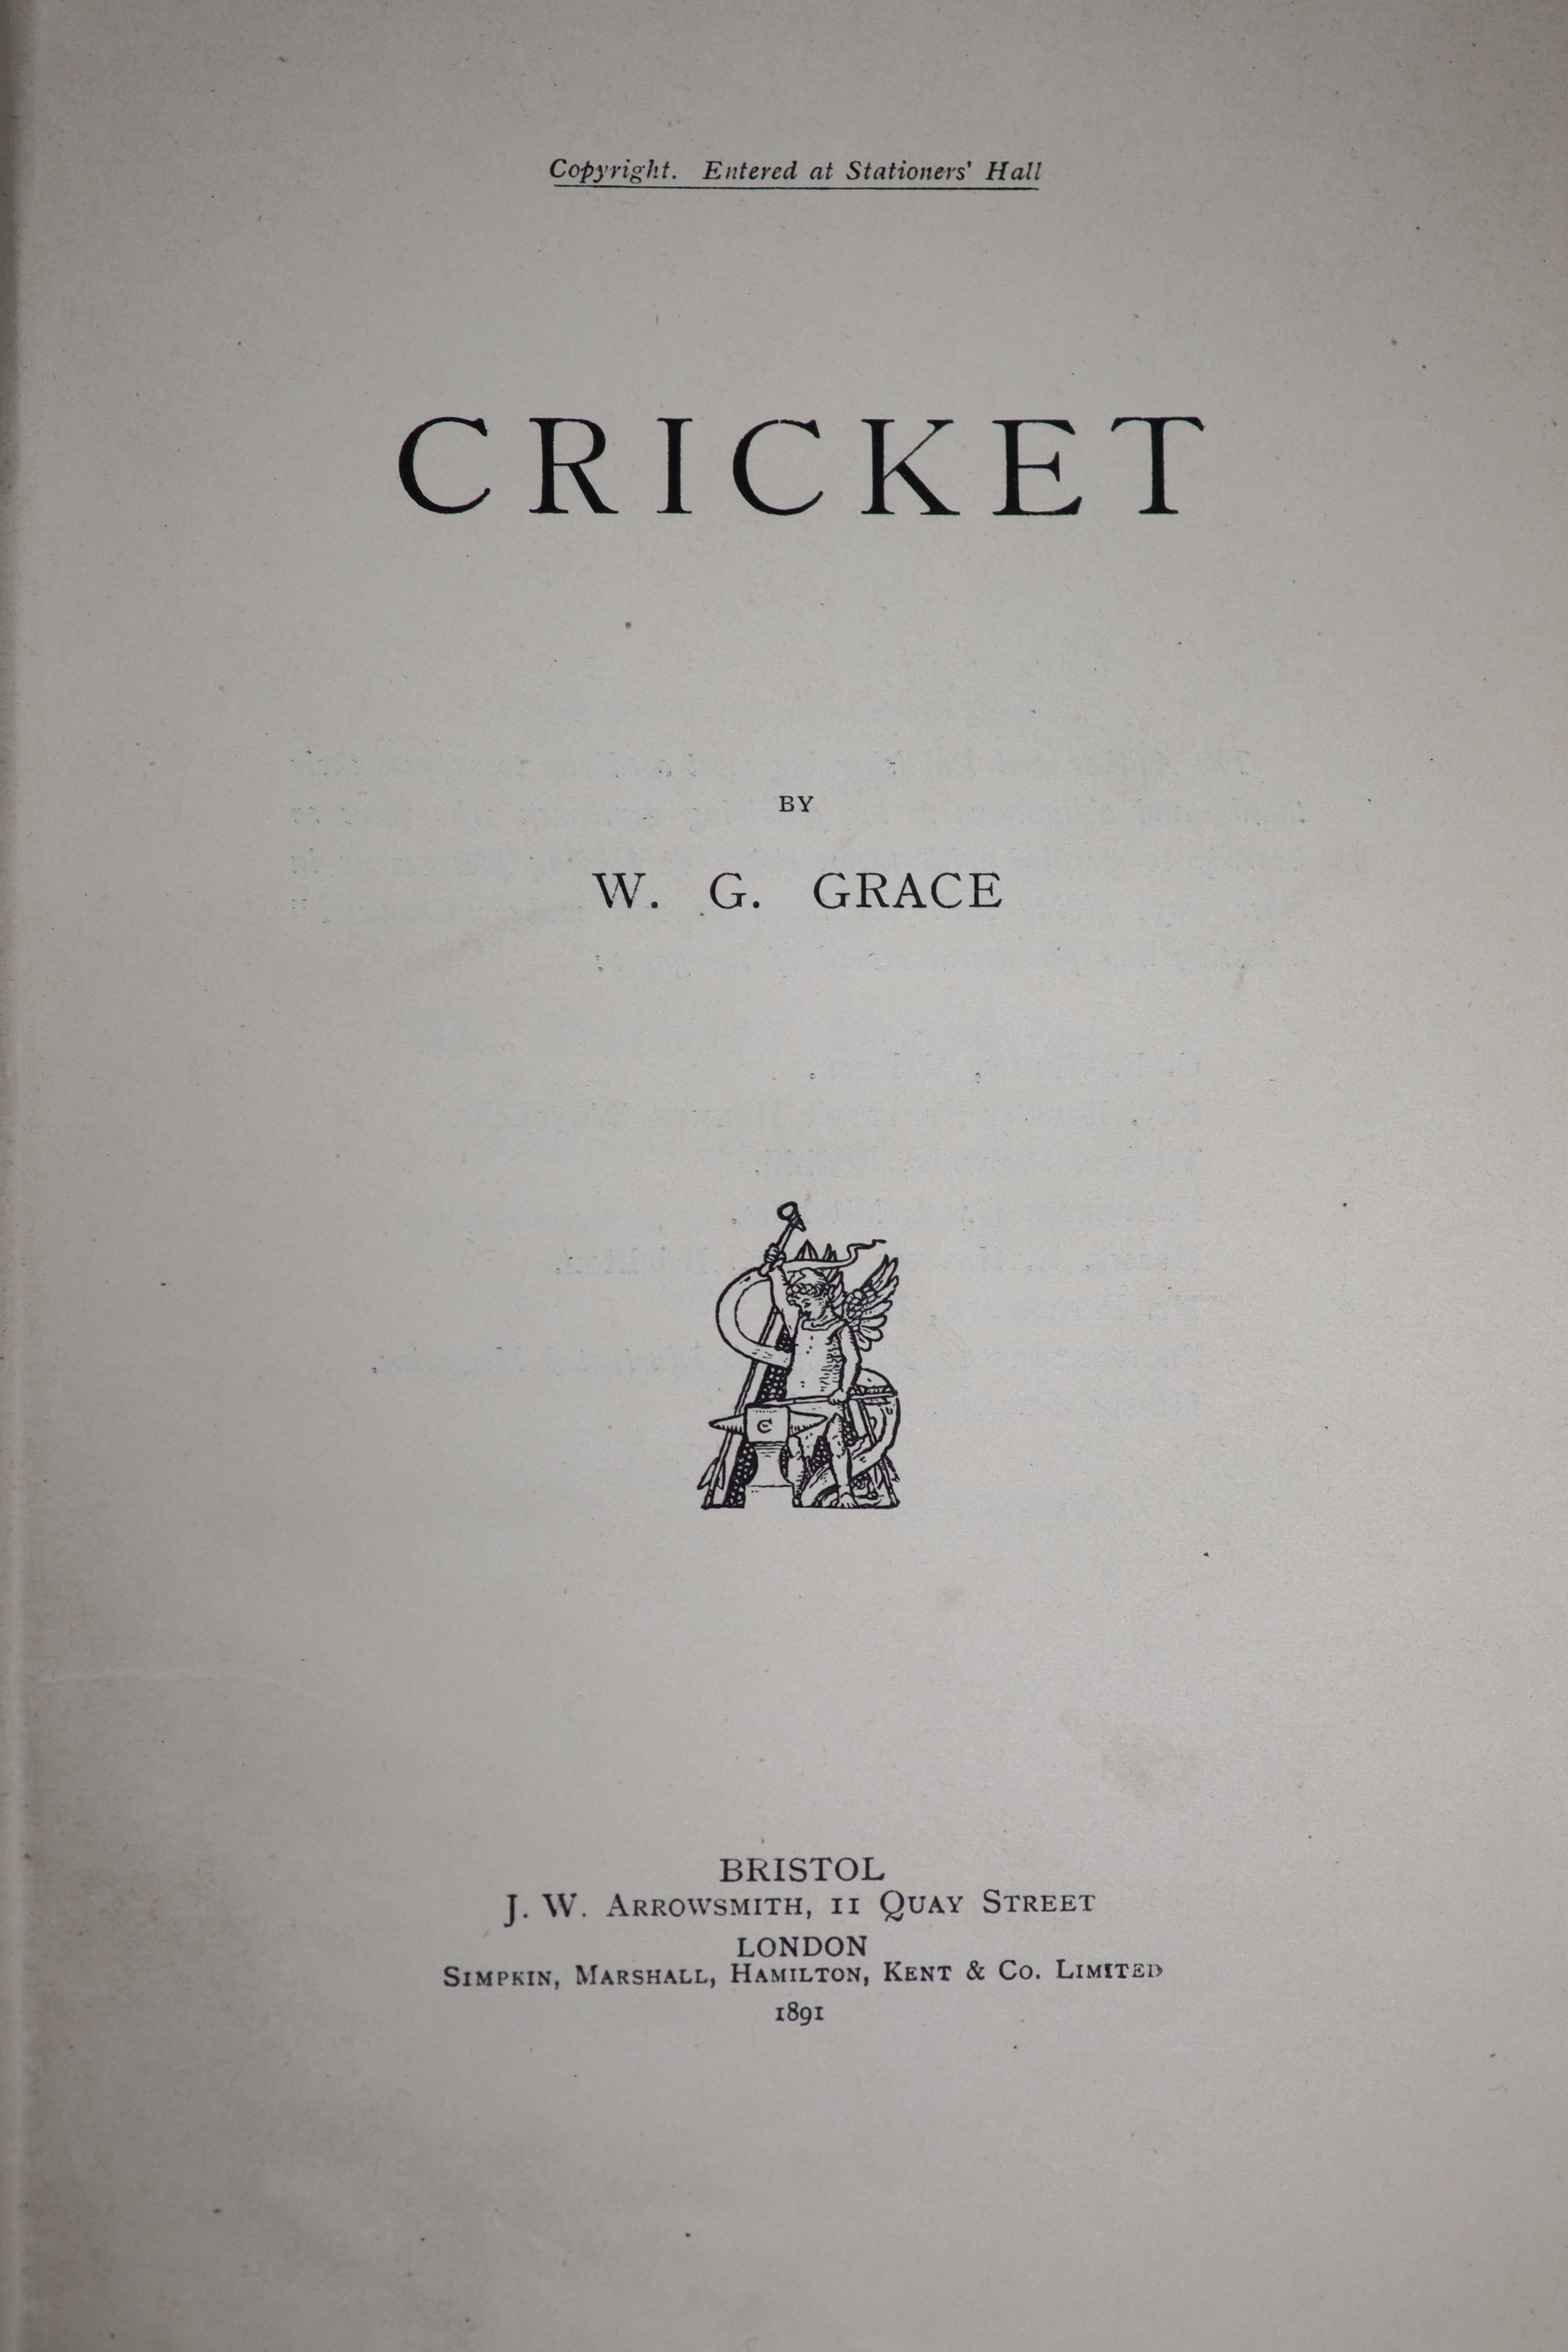 A letter written by W.G. Grace,with a copy of his book, Cricket, 1891